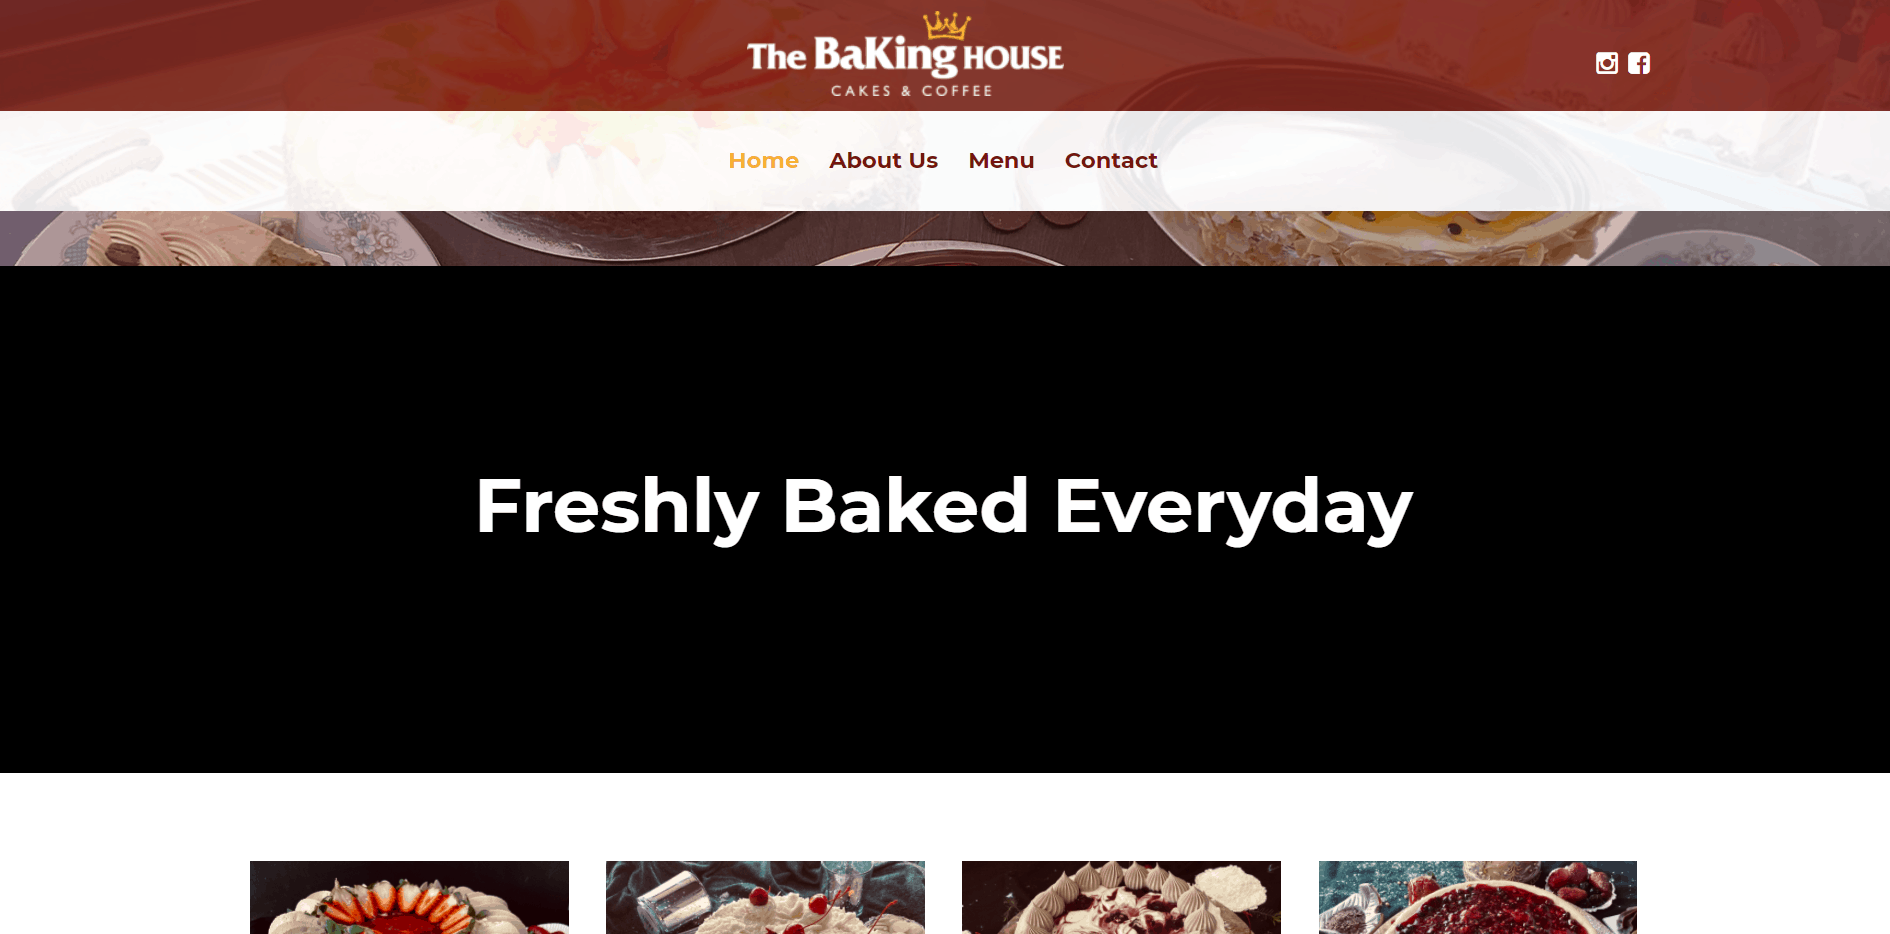 The Baking House